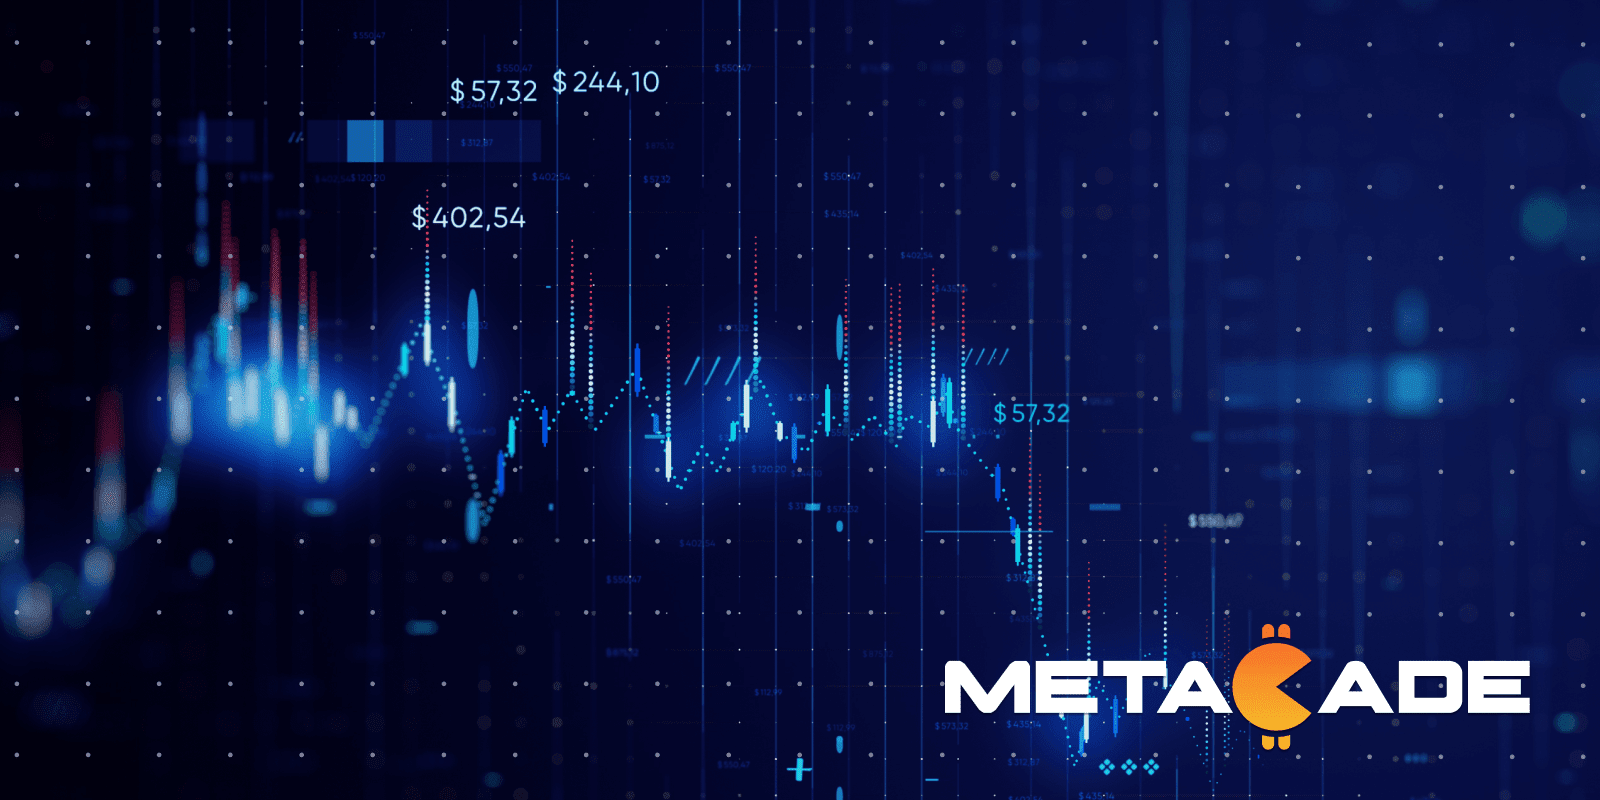 Monero’s XMR Price Falters As Governments Around The World Regulate Crypto. Metacade’s Presale Remains Unaffected.